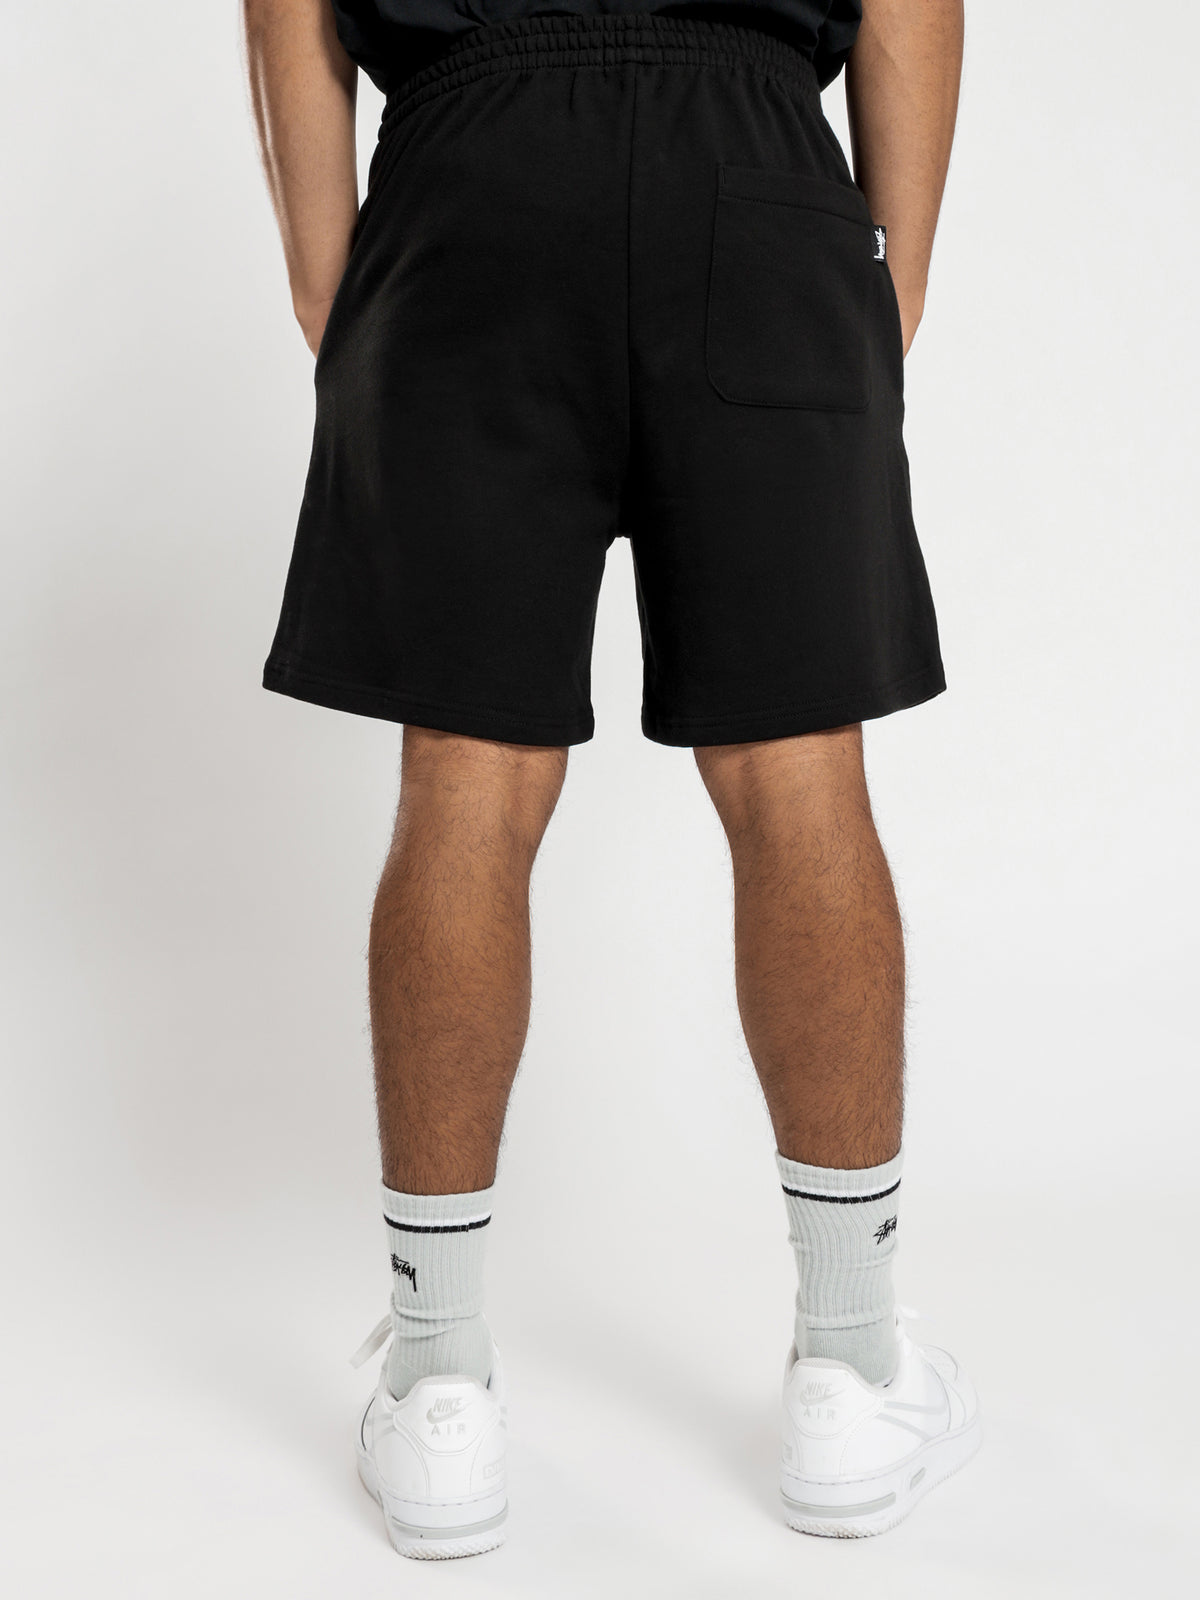 Designs Terry Shorts in Black